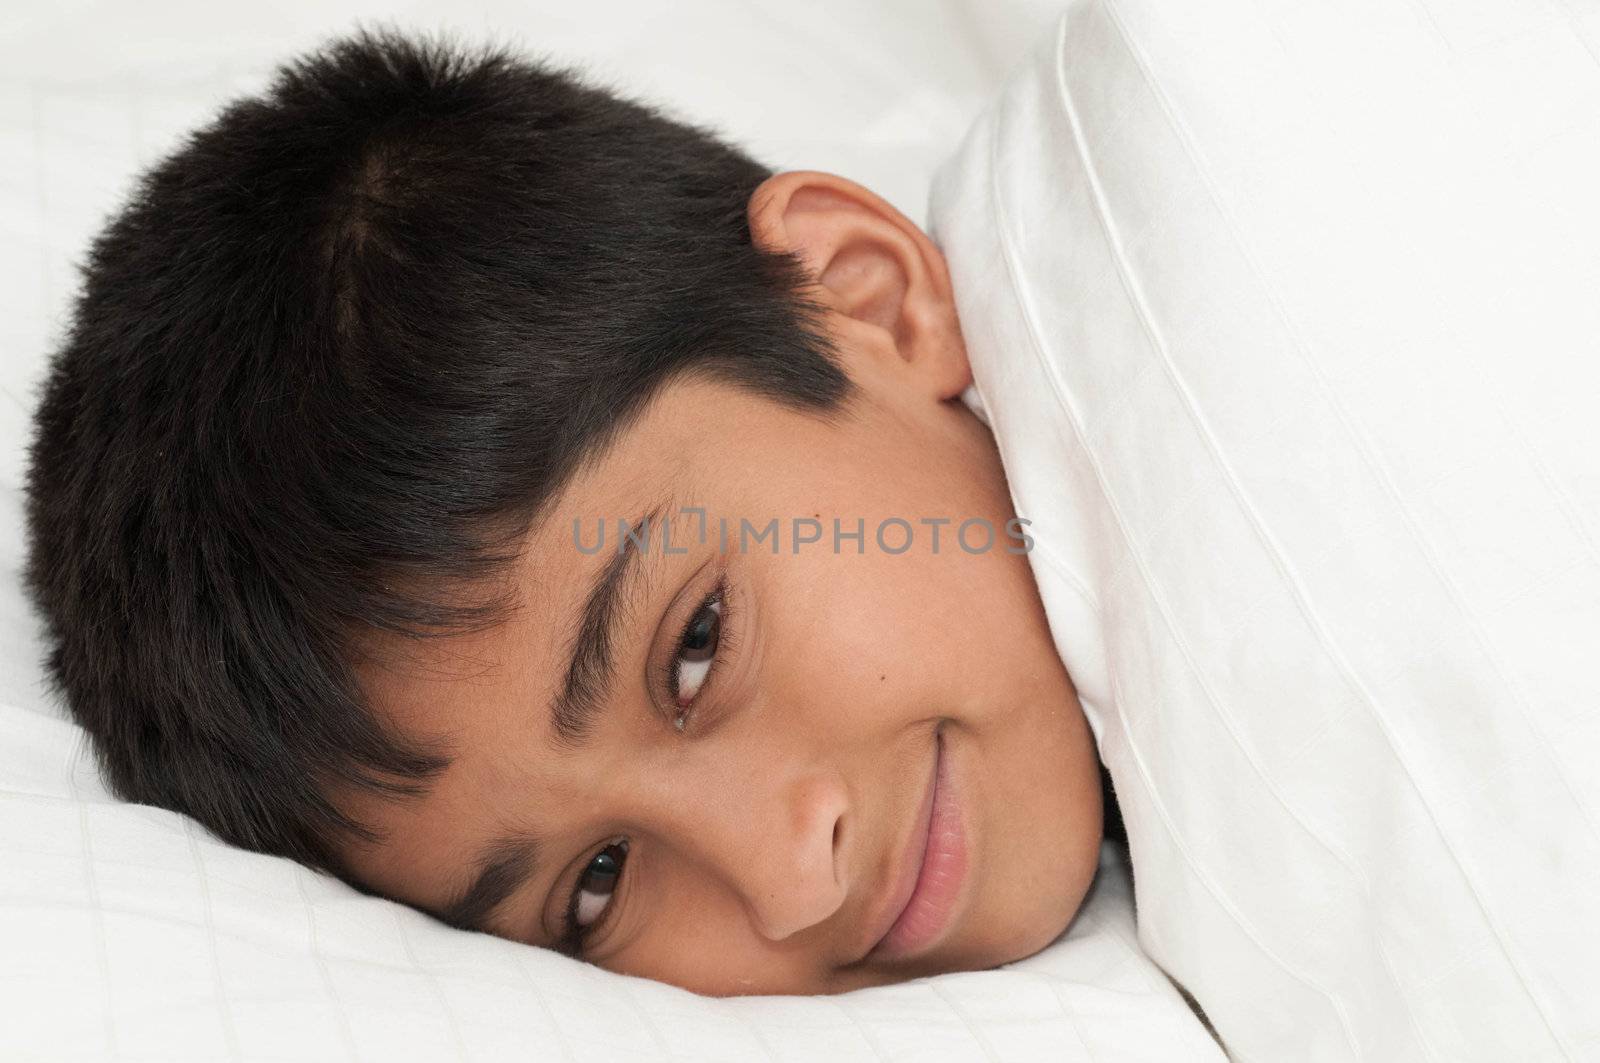 A handsome indian kid smiling for you